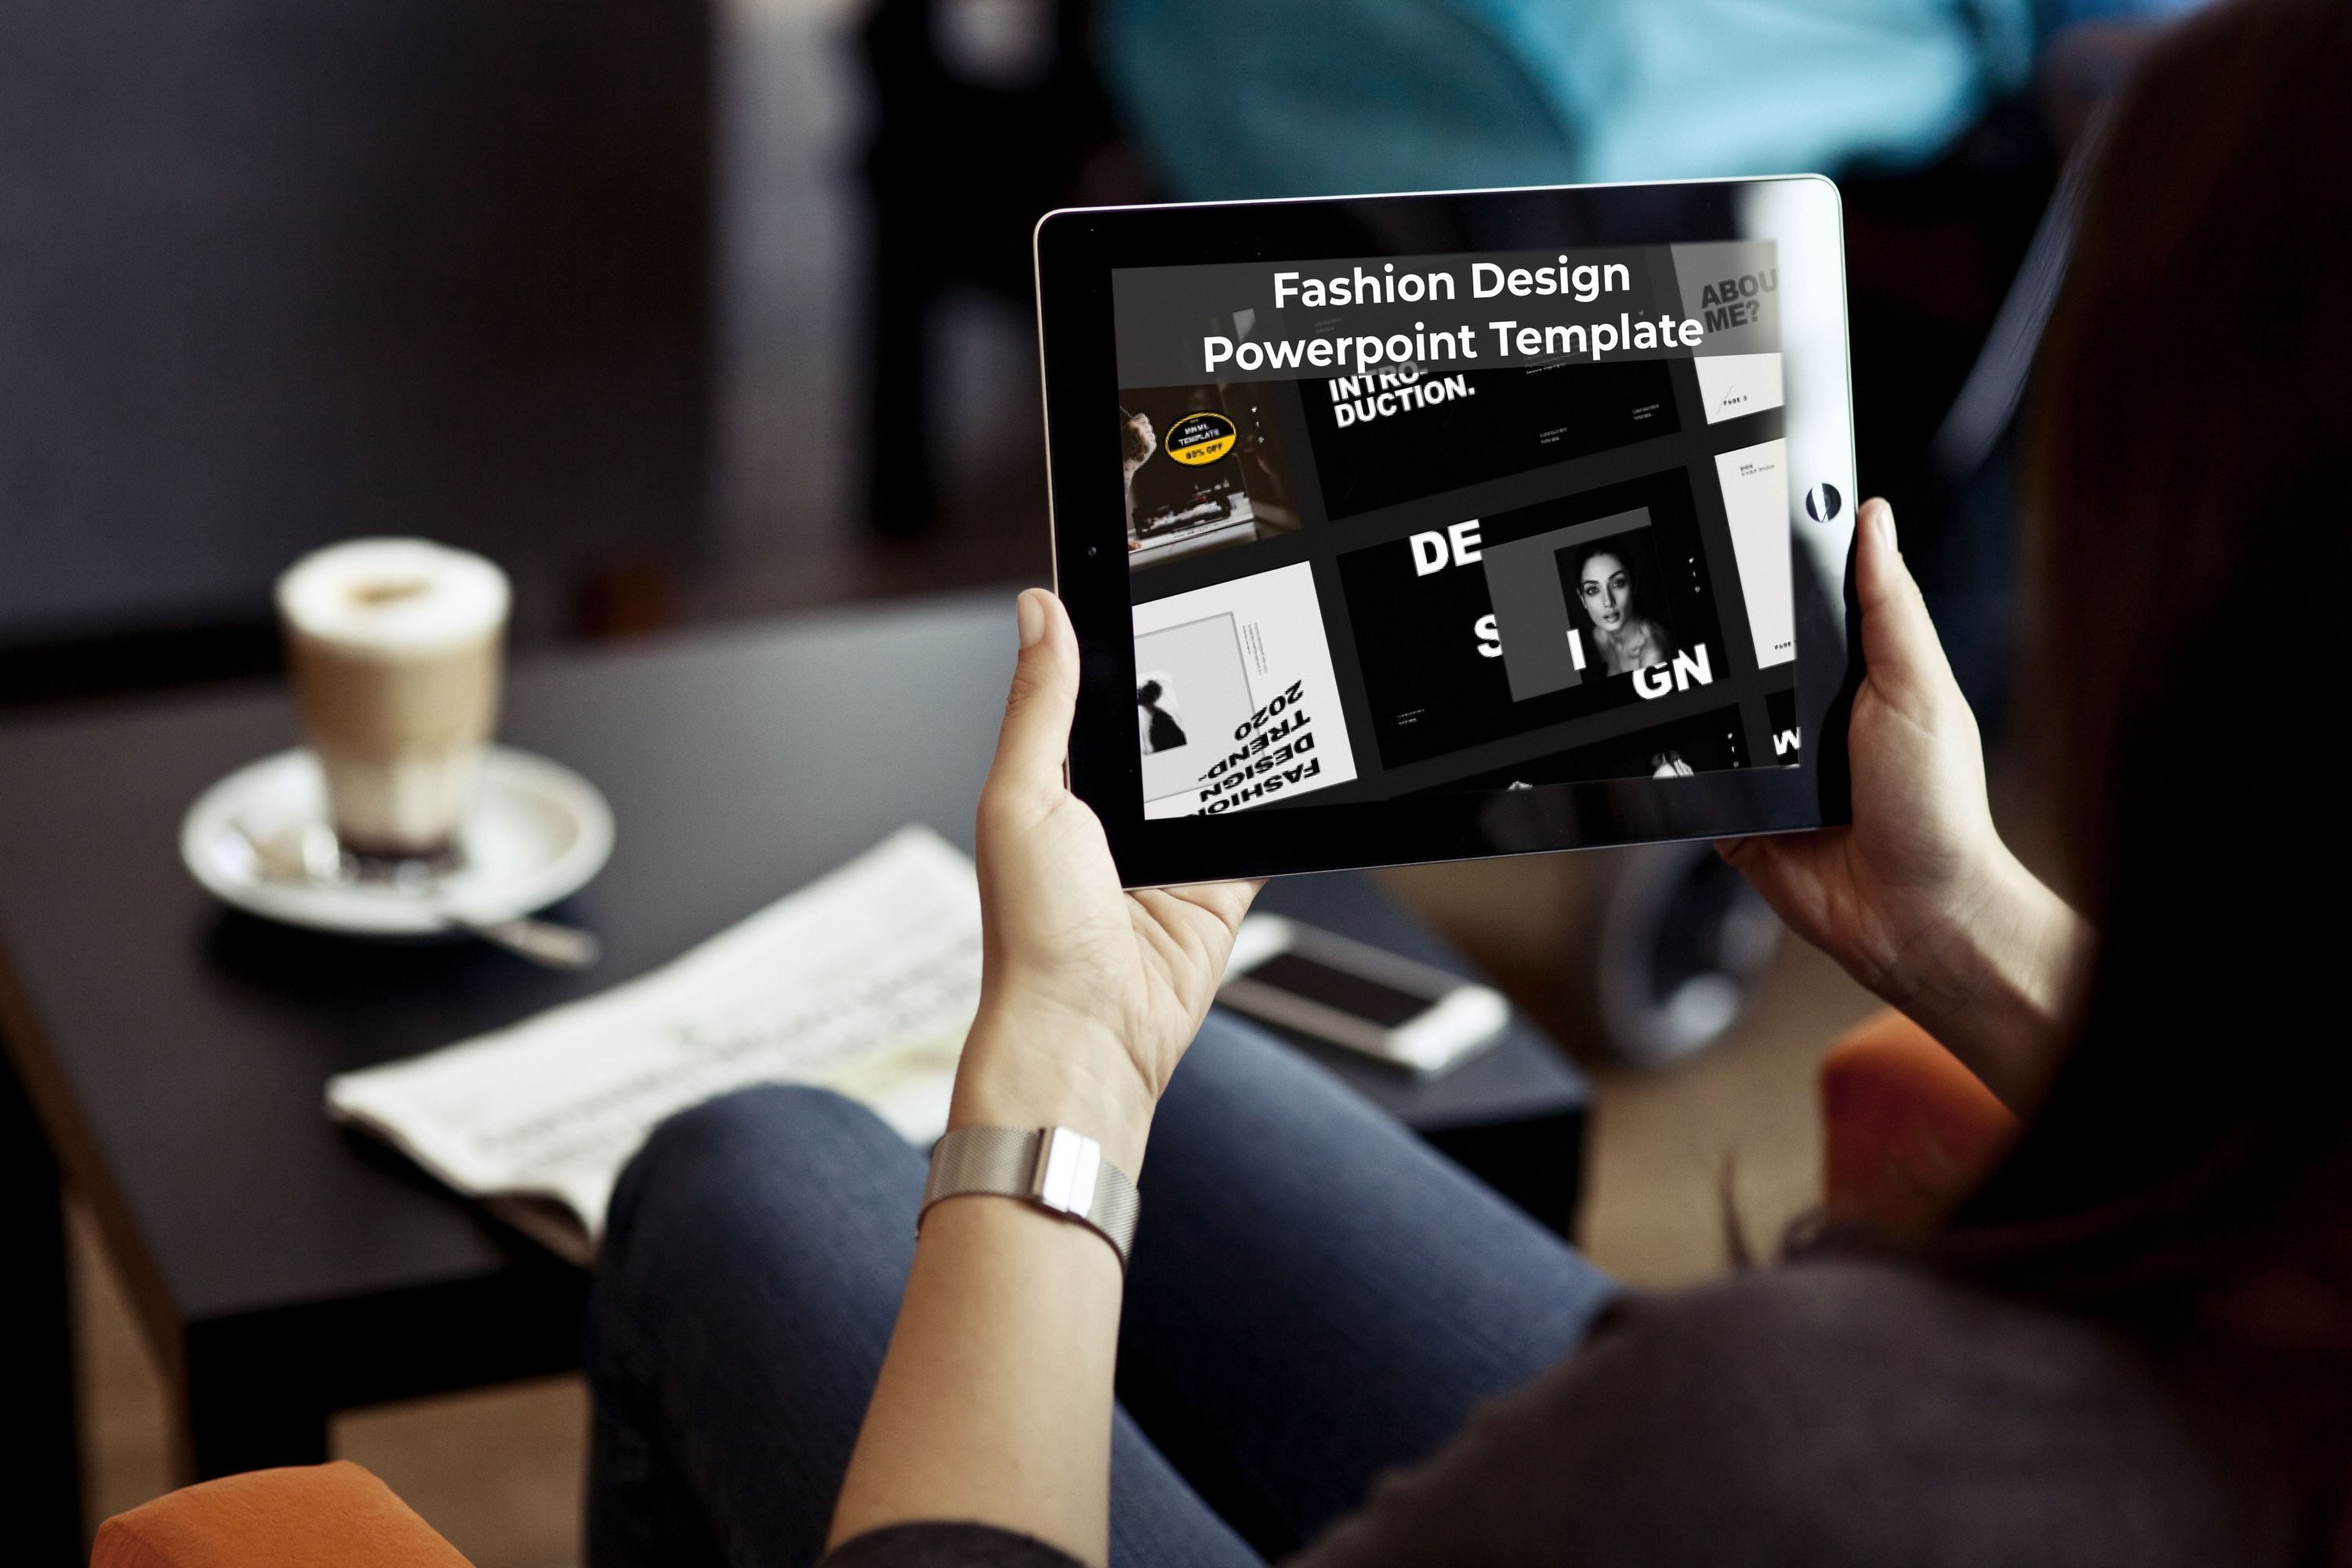 Tablet option of the Fashion Design Powerpoint Template.